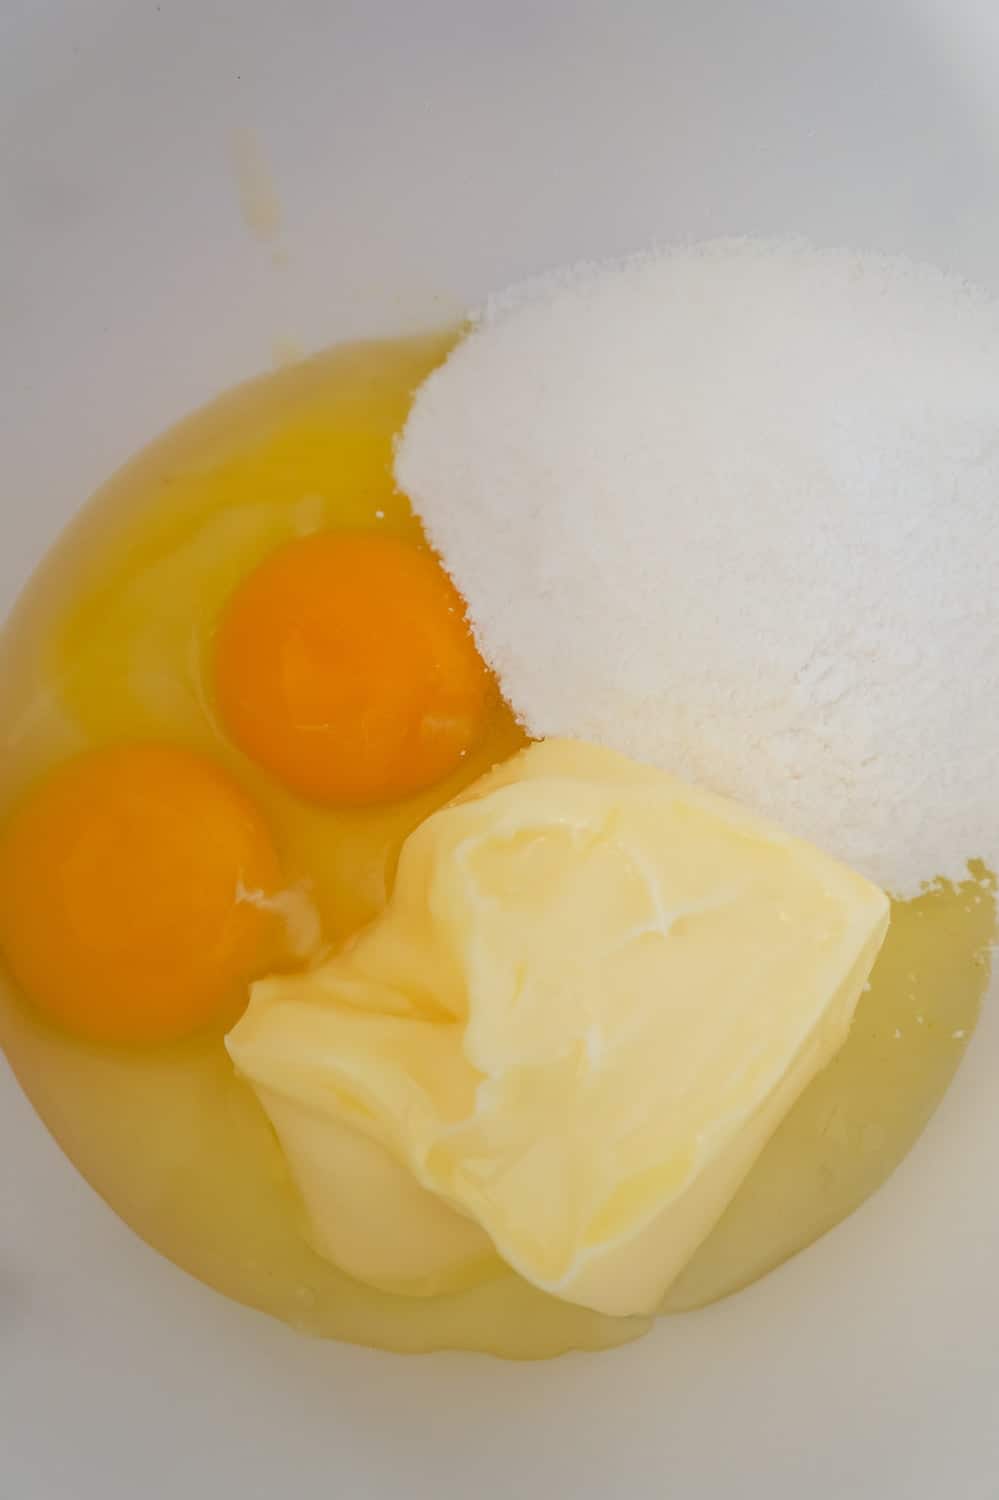 eggs, softened butter and lemon pudding mix in a mixing bowl